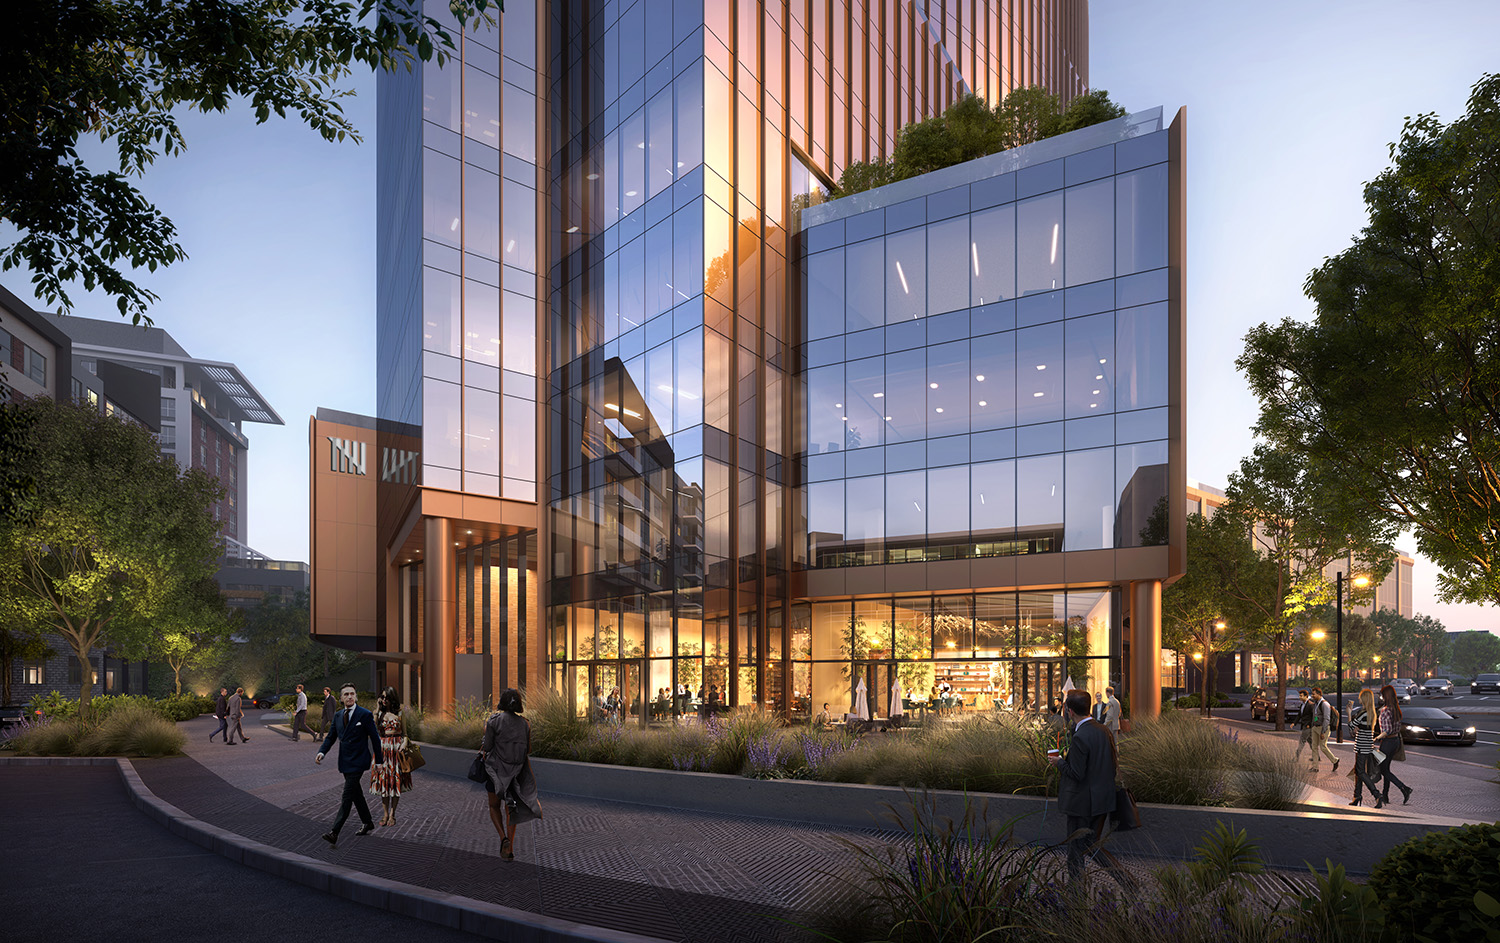 Construction recently started on 5 City Blvd, a 15-story office and mixed-use building in Nashville. Rendering courtesy Goettsch Partners